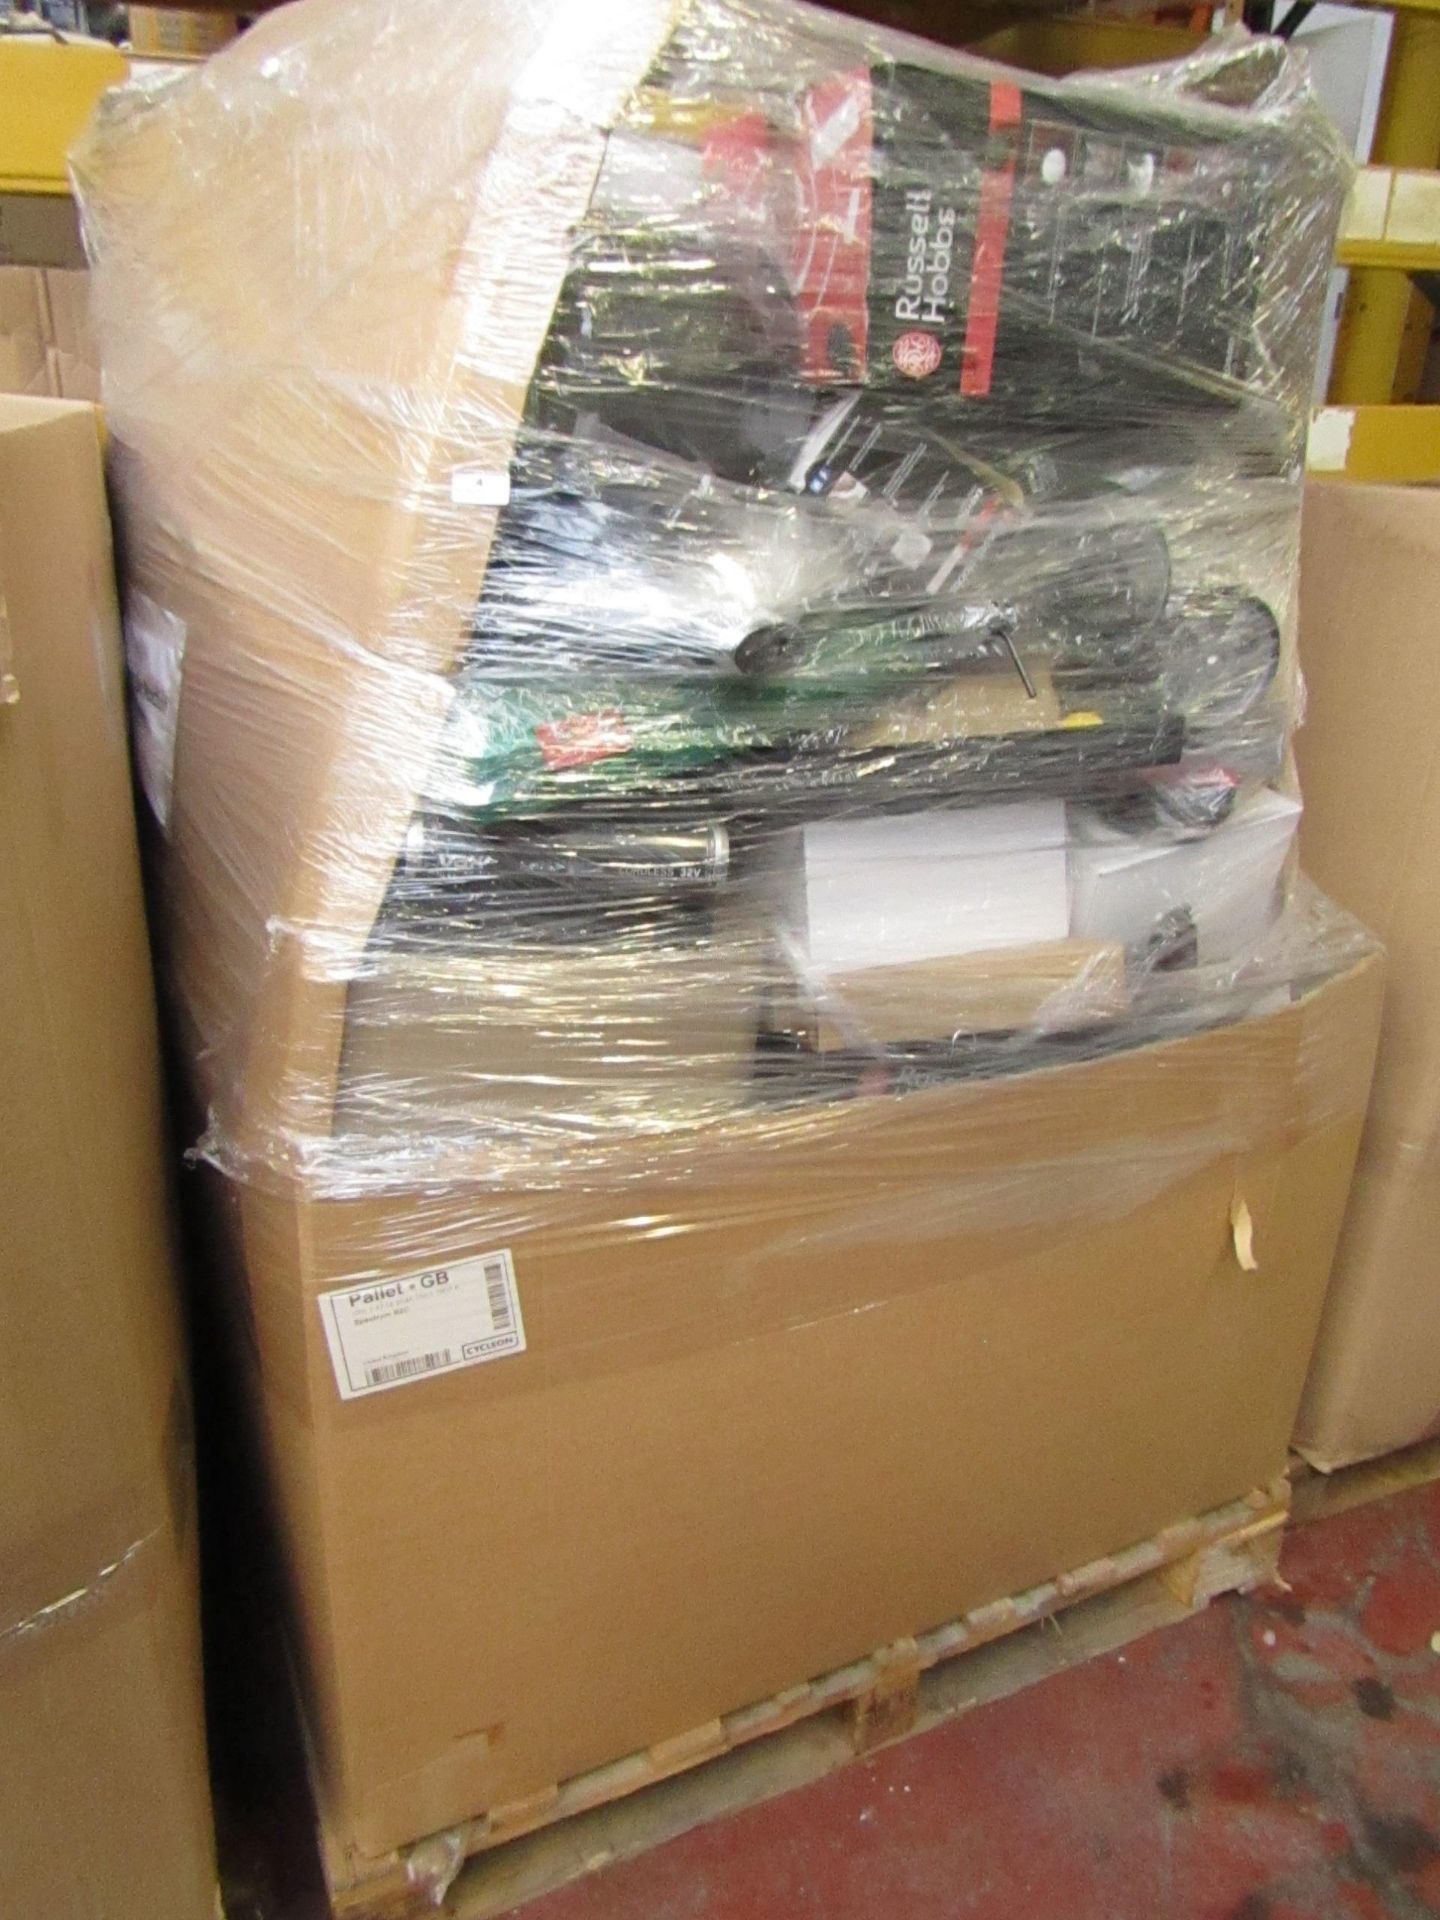 | 1x | PALLET OF OF ITEMS MARKED UP AS 'OLD SPARES' WHICH LOOK TO HAVE SPARE PARTS AND ACCESSORIES